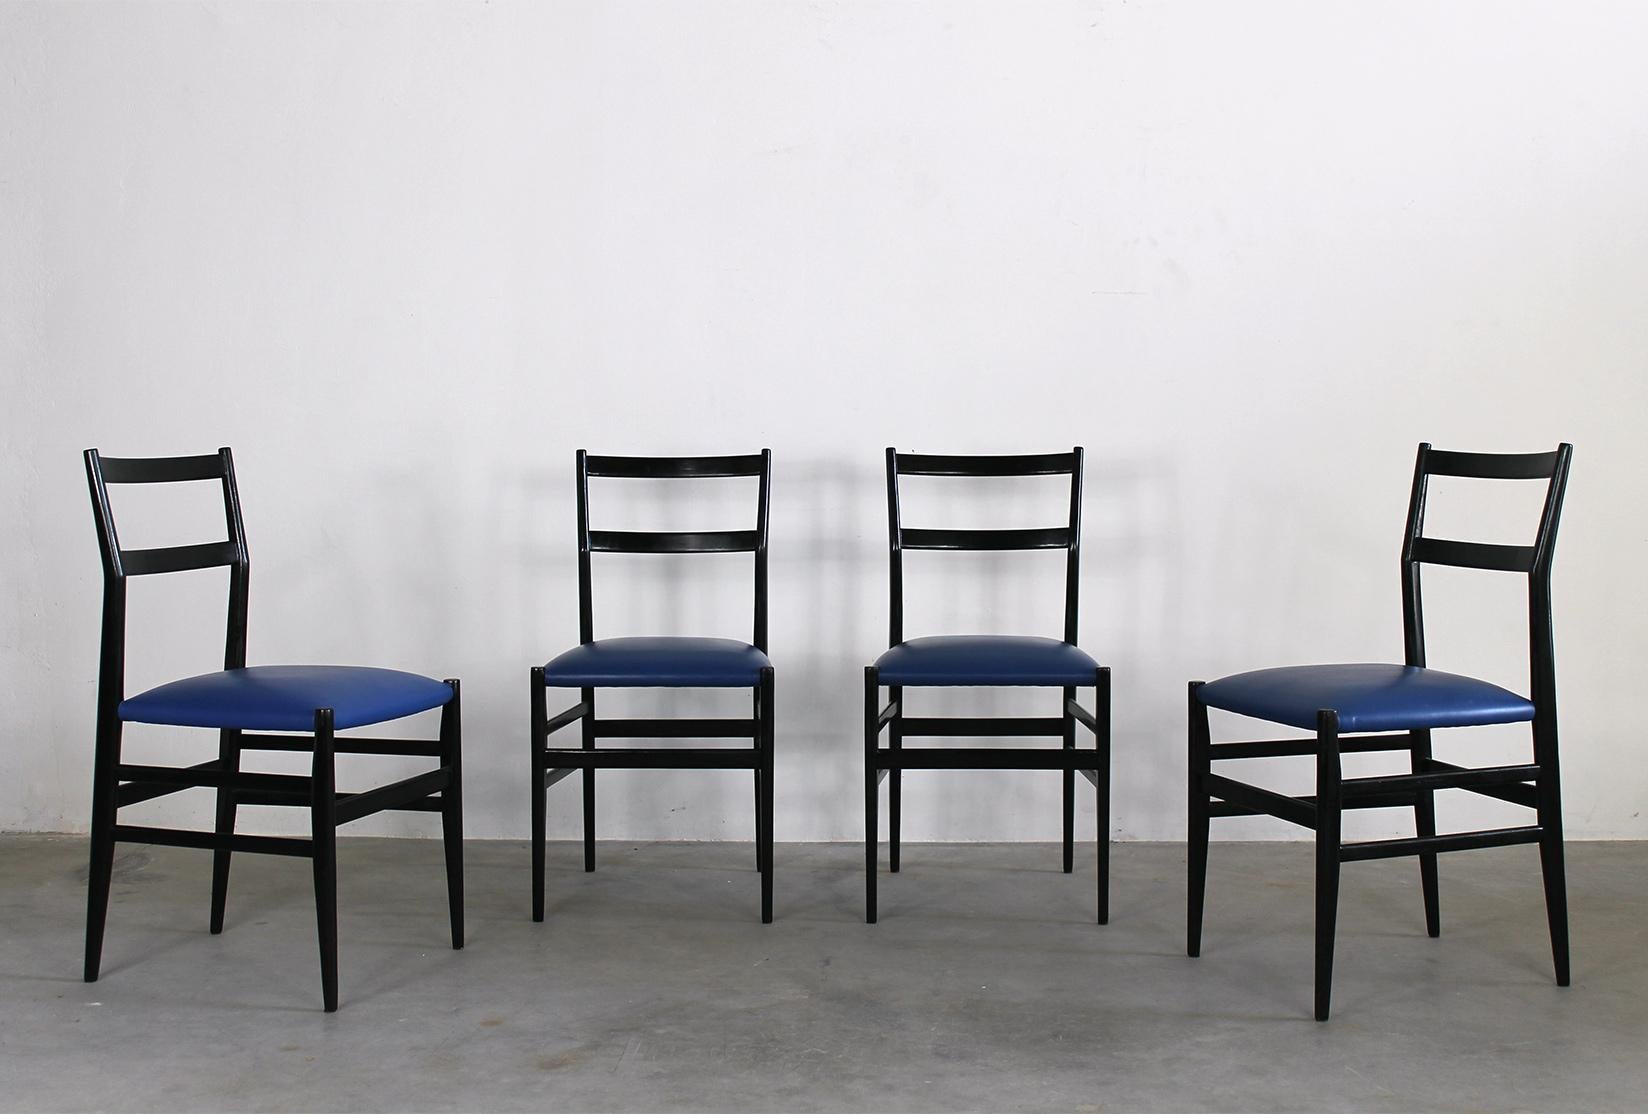 Set of four Leggera dining chairs with structure in black lacquered wood and seat in padded blue leatherette, designed by Gio Ponti and manufactured by Cassina in 1951.

Leggera is a simple chair, with a polite, clear, cultured shape, strong in its